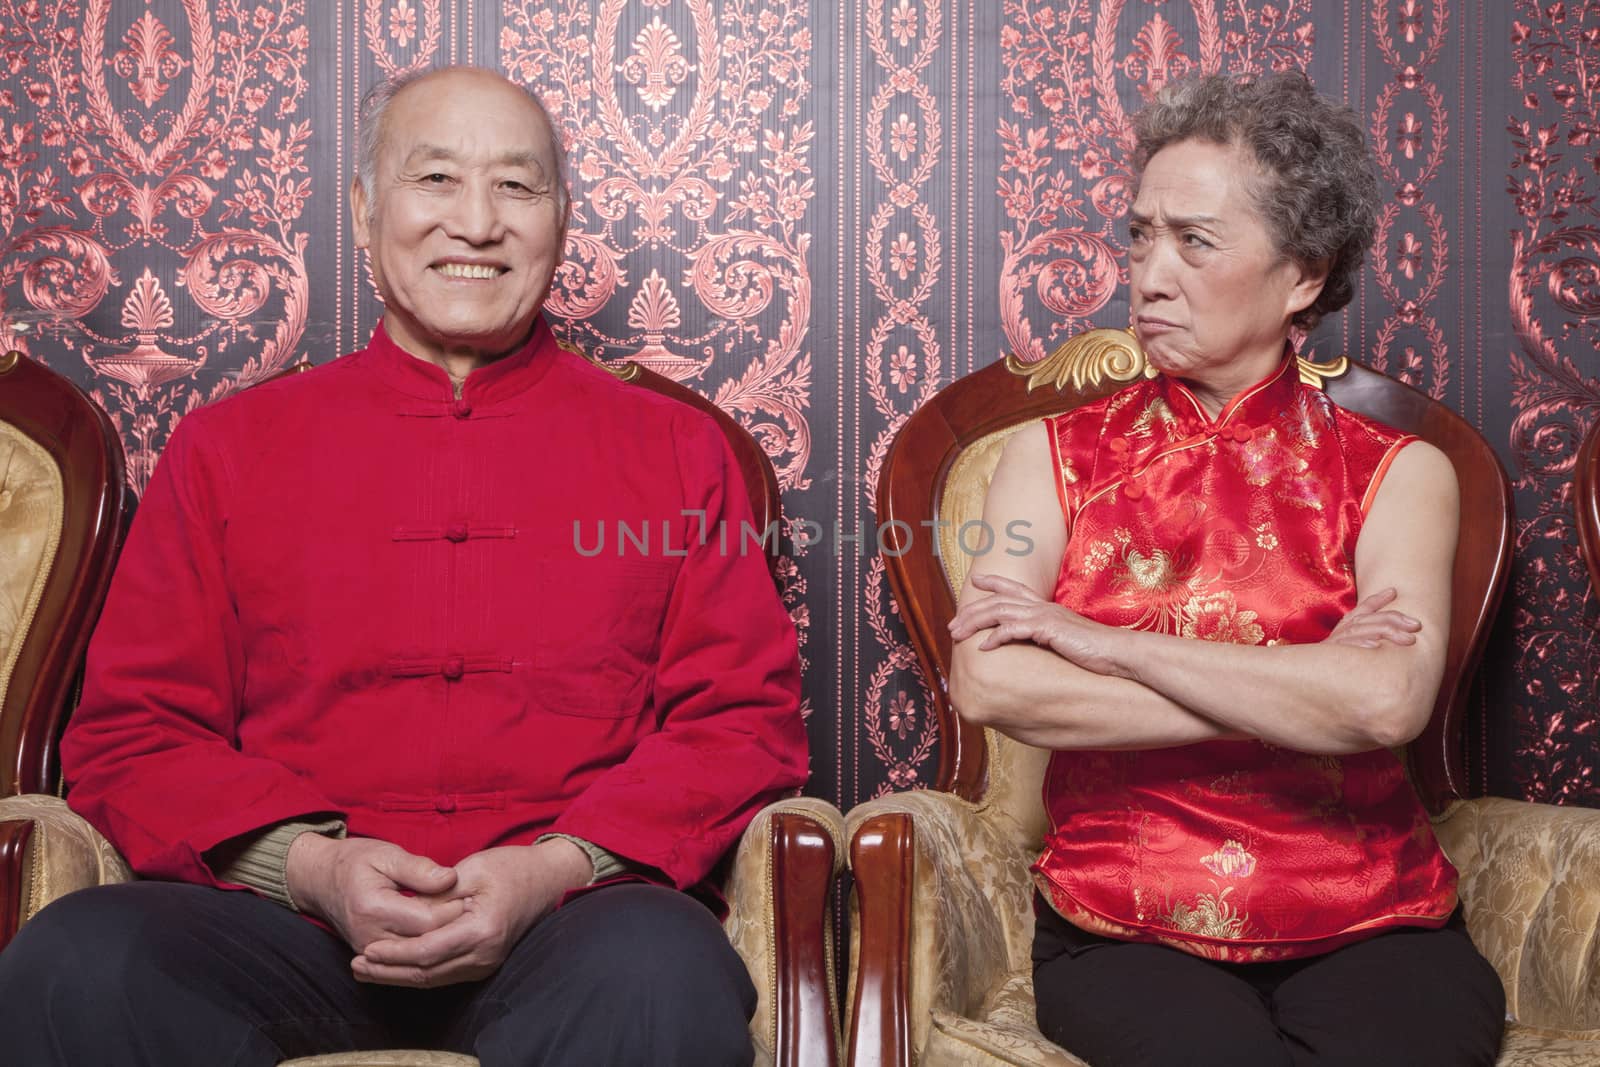 Angry Grandmother and Happy Grandfather in Traditional Chinese Clothing